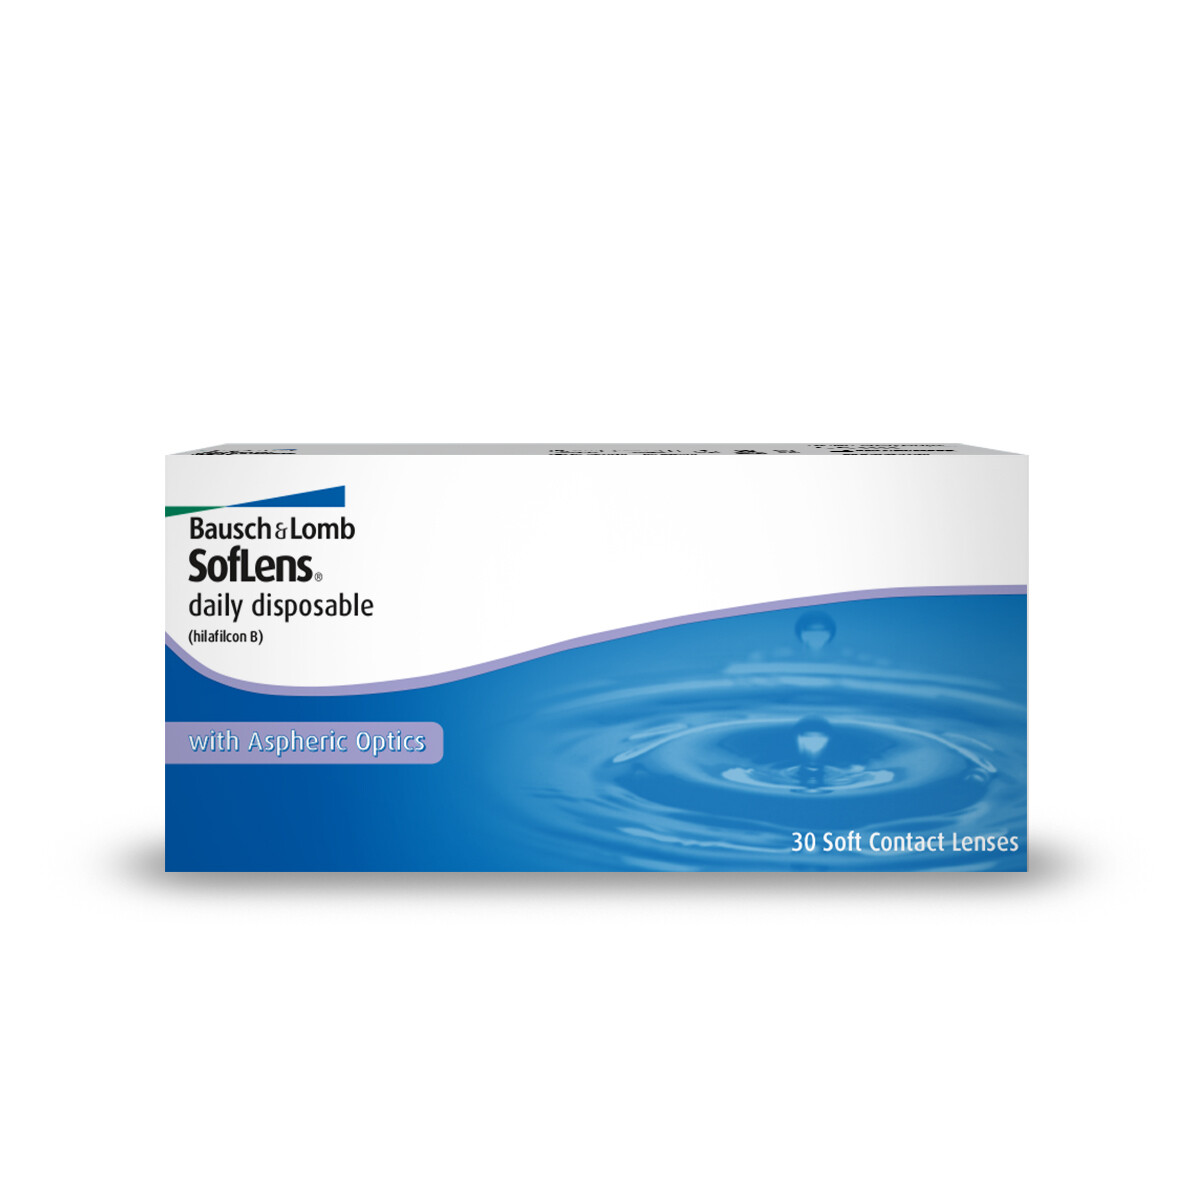 SofLens daily disposable 30 Pack